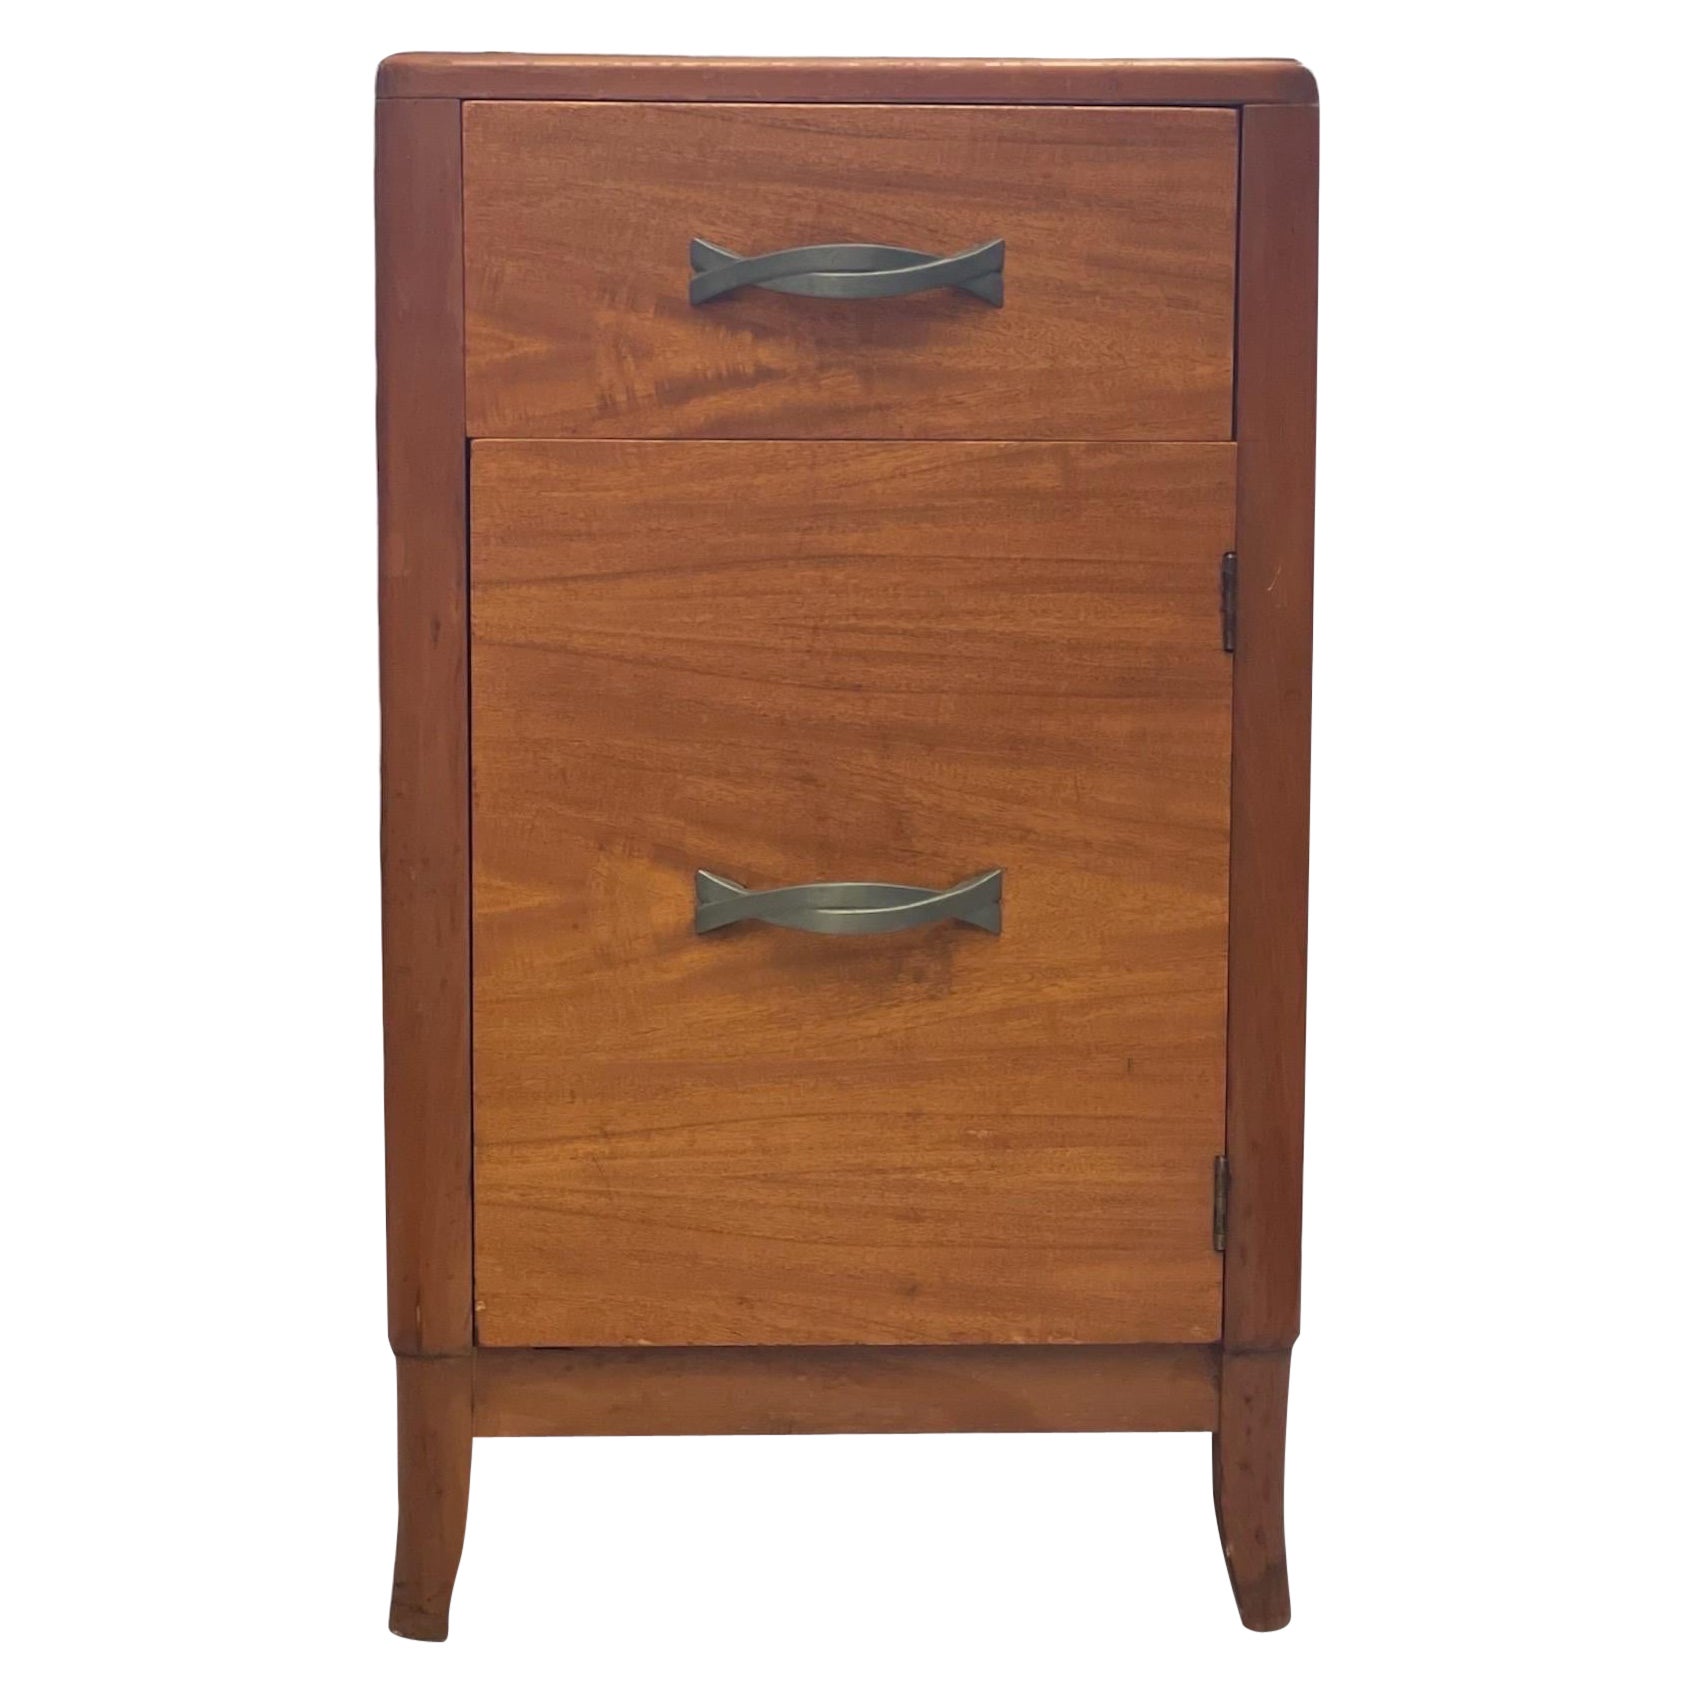 Vintage Mid-Century Modern Accent Table Dovetail Drawers Circa 1950s - 1970s.